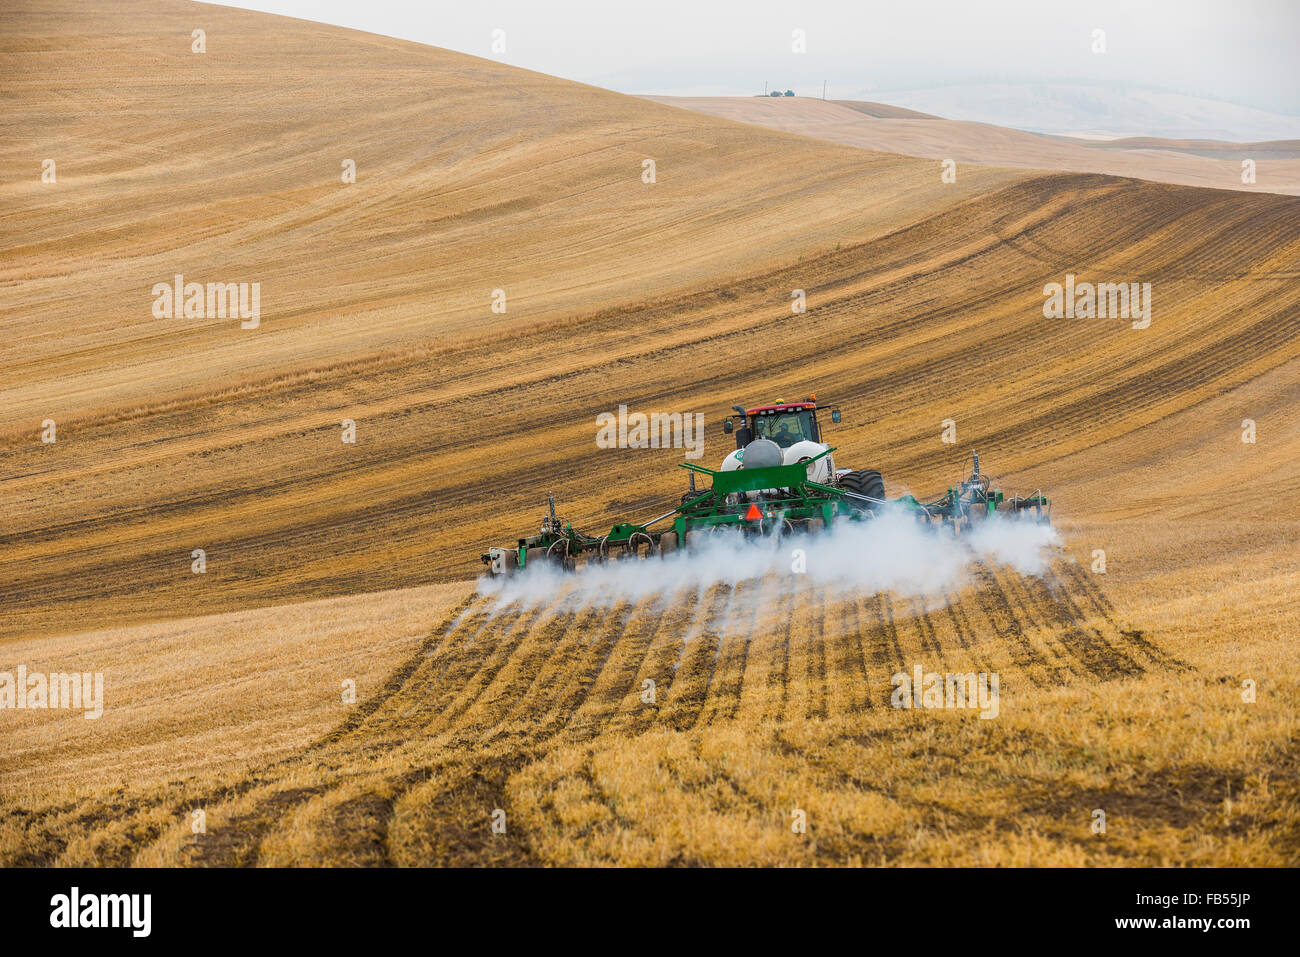 Case quadtrac tractor pulling an anhydrous ammonia tank and applicator applying the anhydrous to a field in advance of preparing Stock Photo